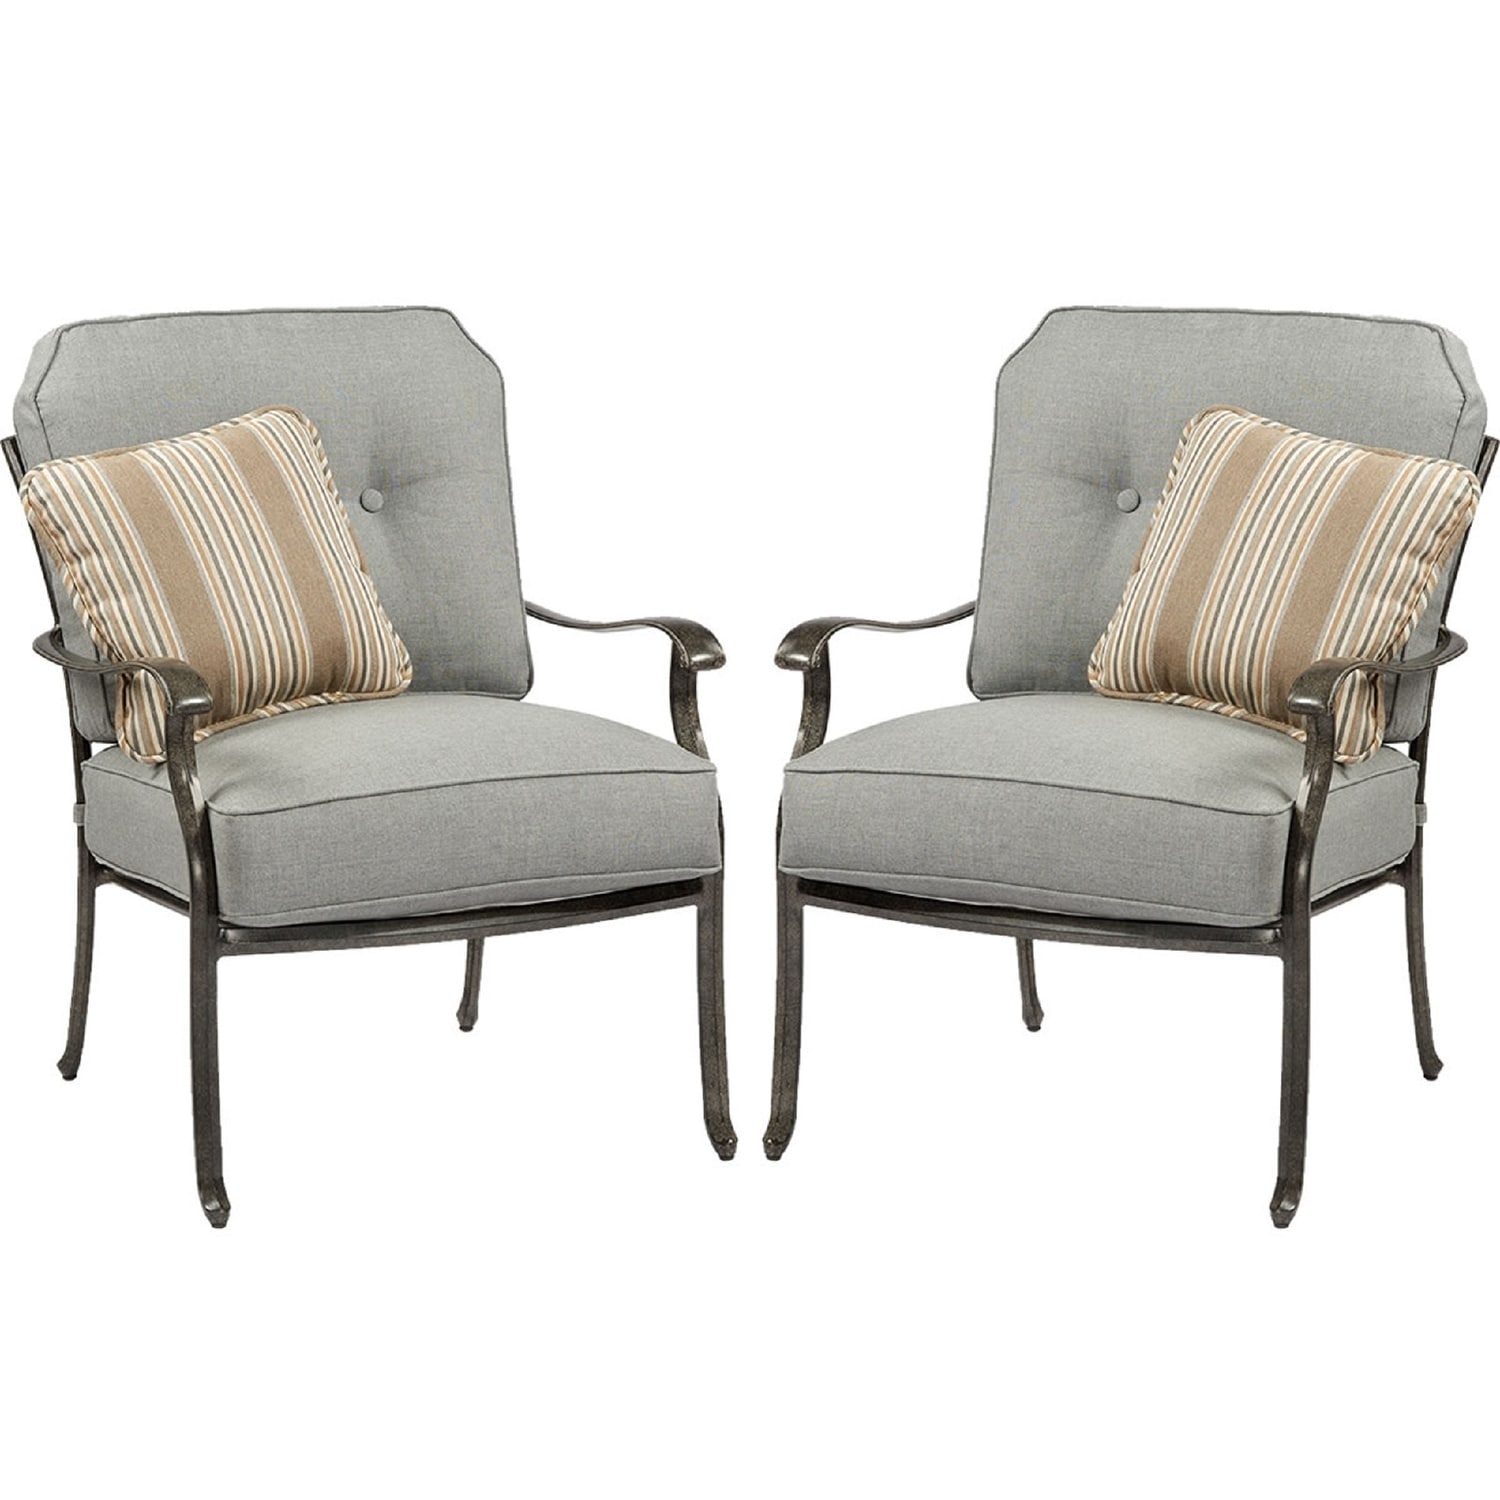 Agio Madison Lounge Chair Set Of 2 With Cushion - 28in W X 34in D X 36in H